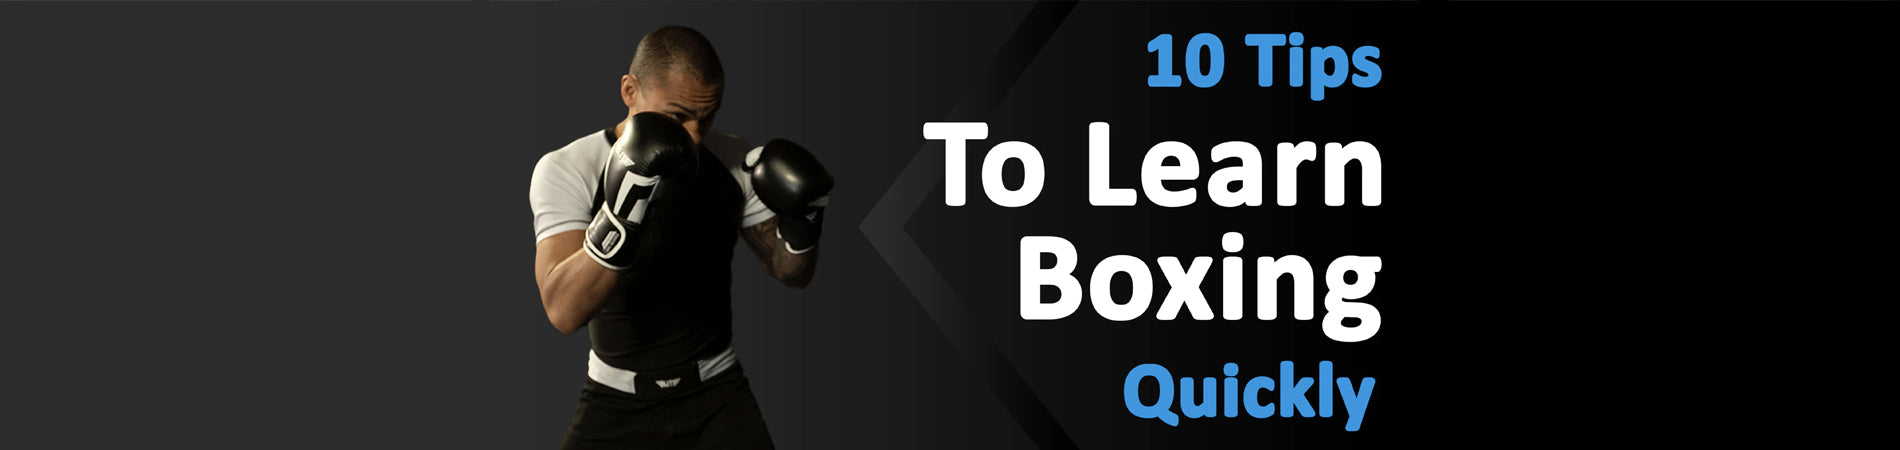 A Beginner’s Guide: 10 Tips to Learn Boxing Quickly